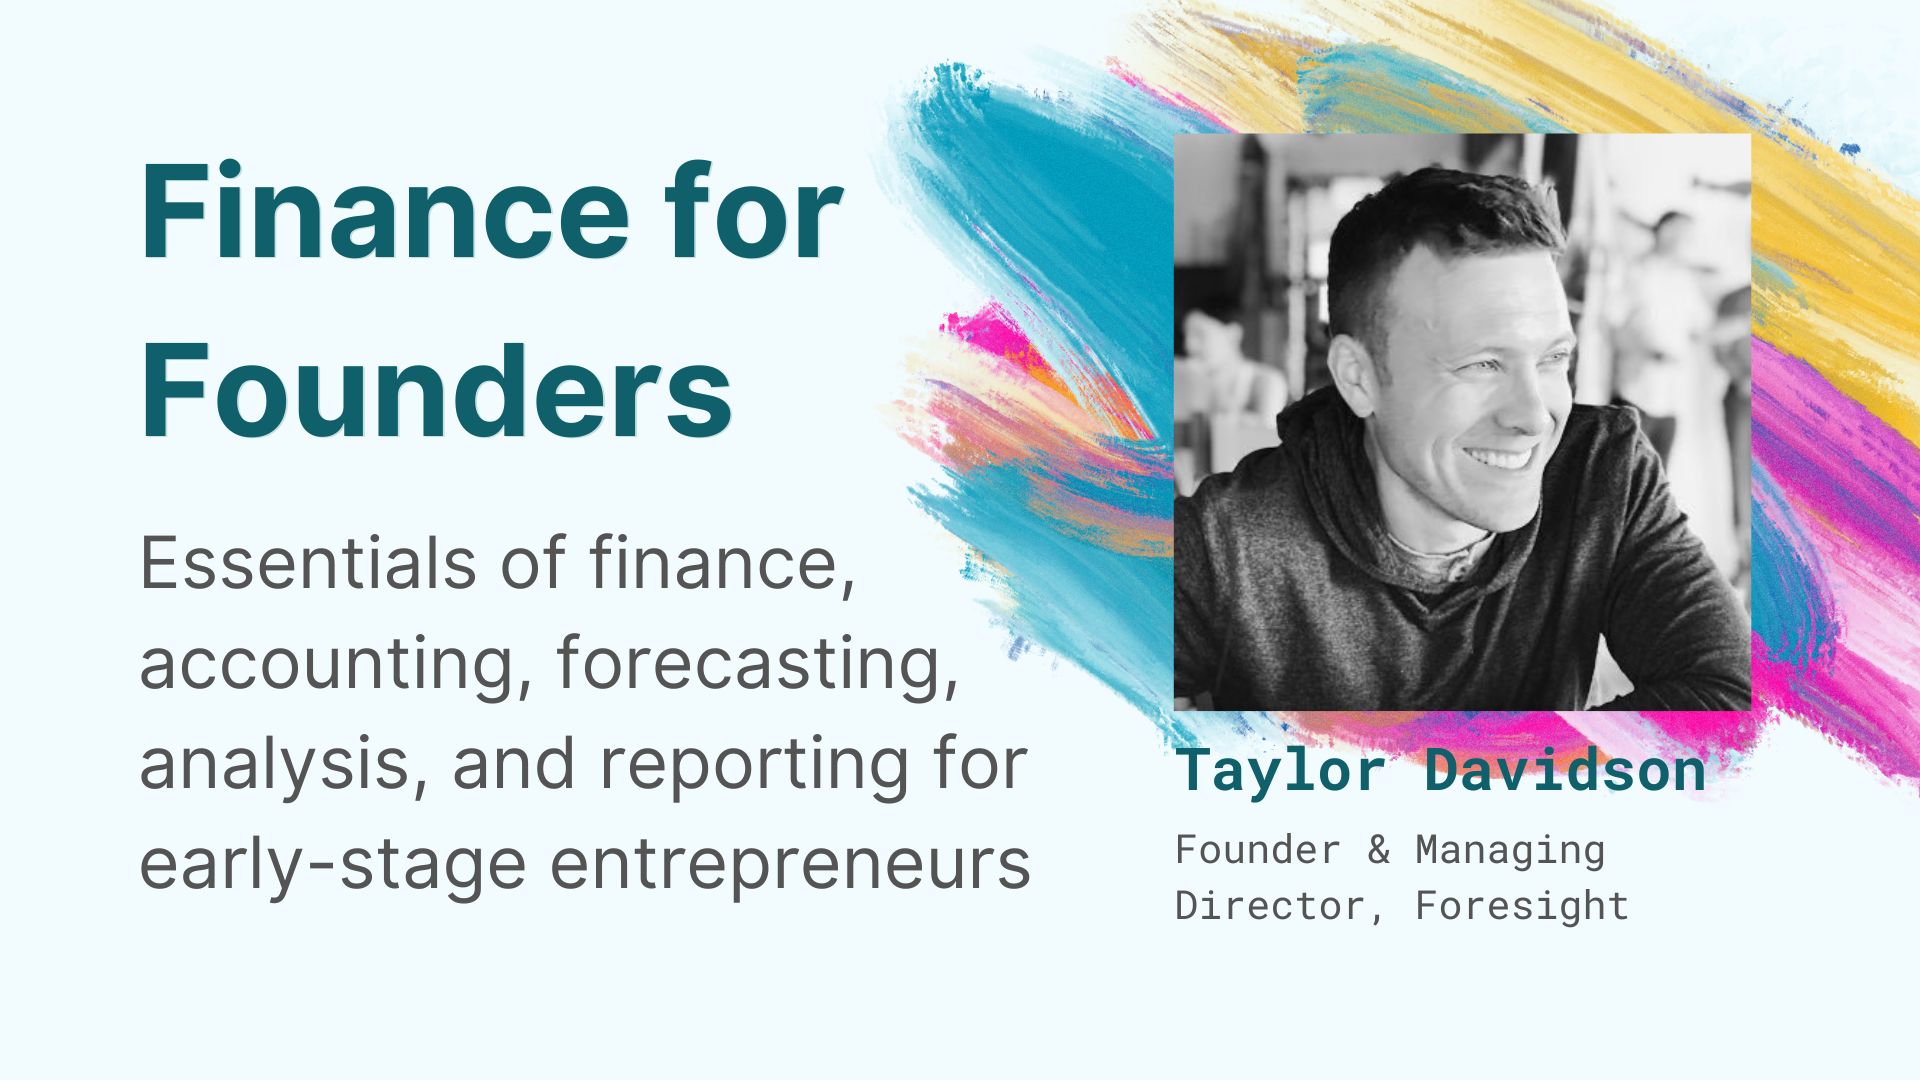 Finance for Founders